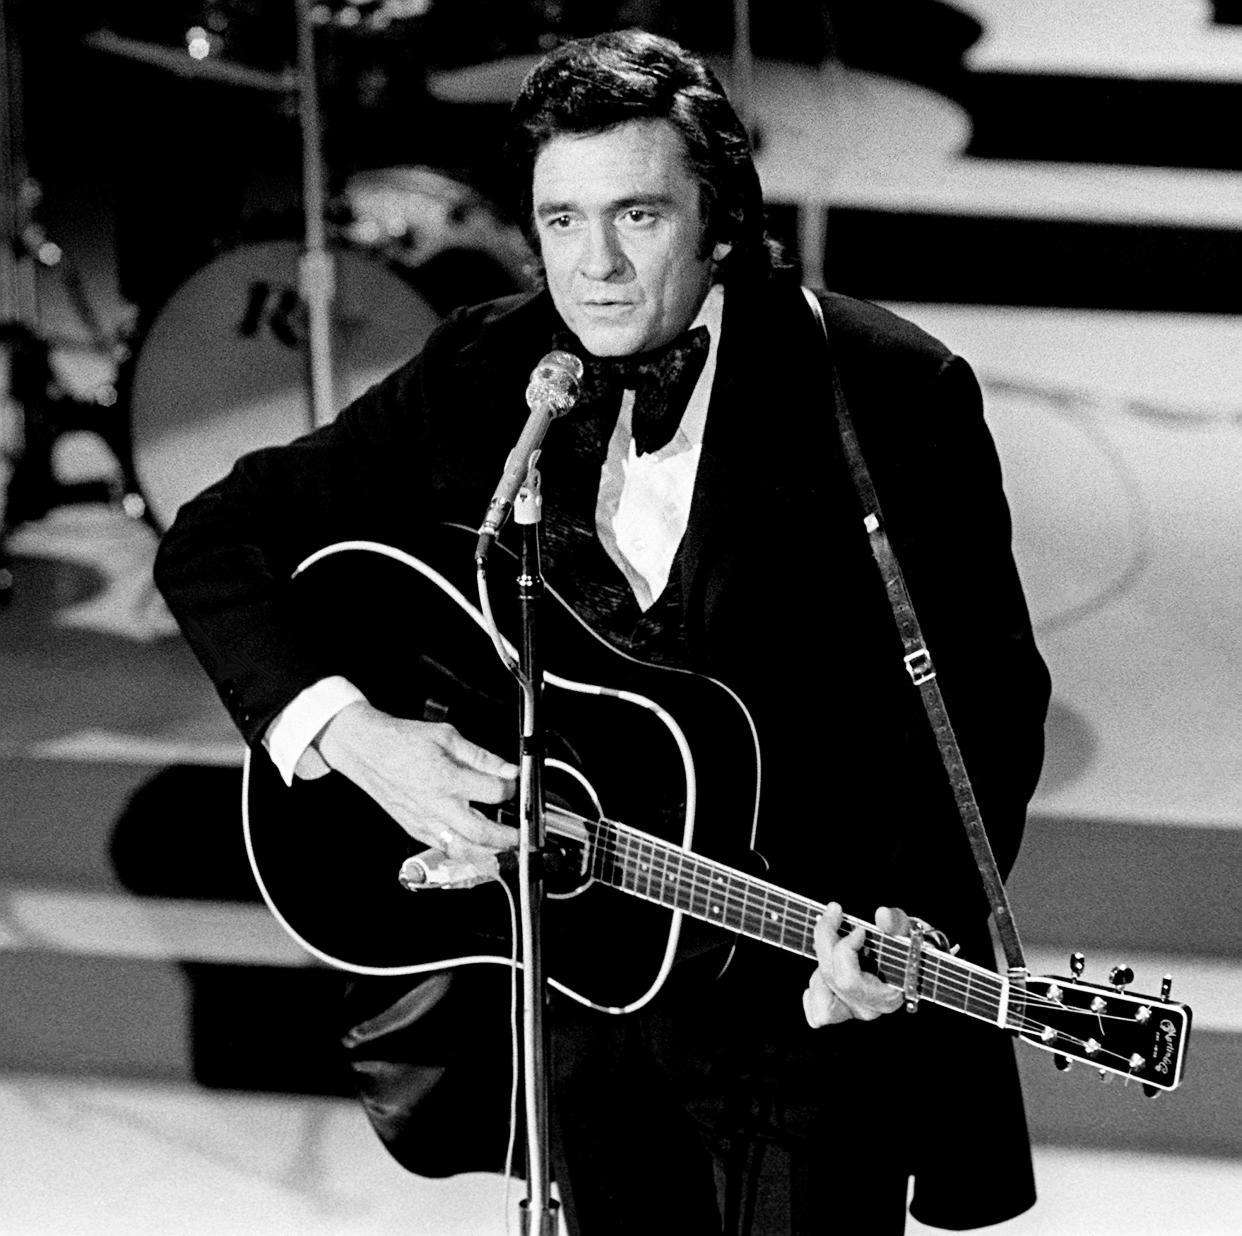 Host Johnny Cash performs for the crowd during the seventh annual CMA Awards show at the Grand Ole Opry House on Oct. 15,1973.